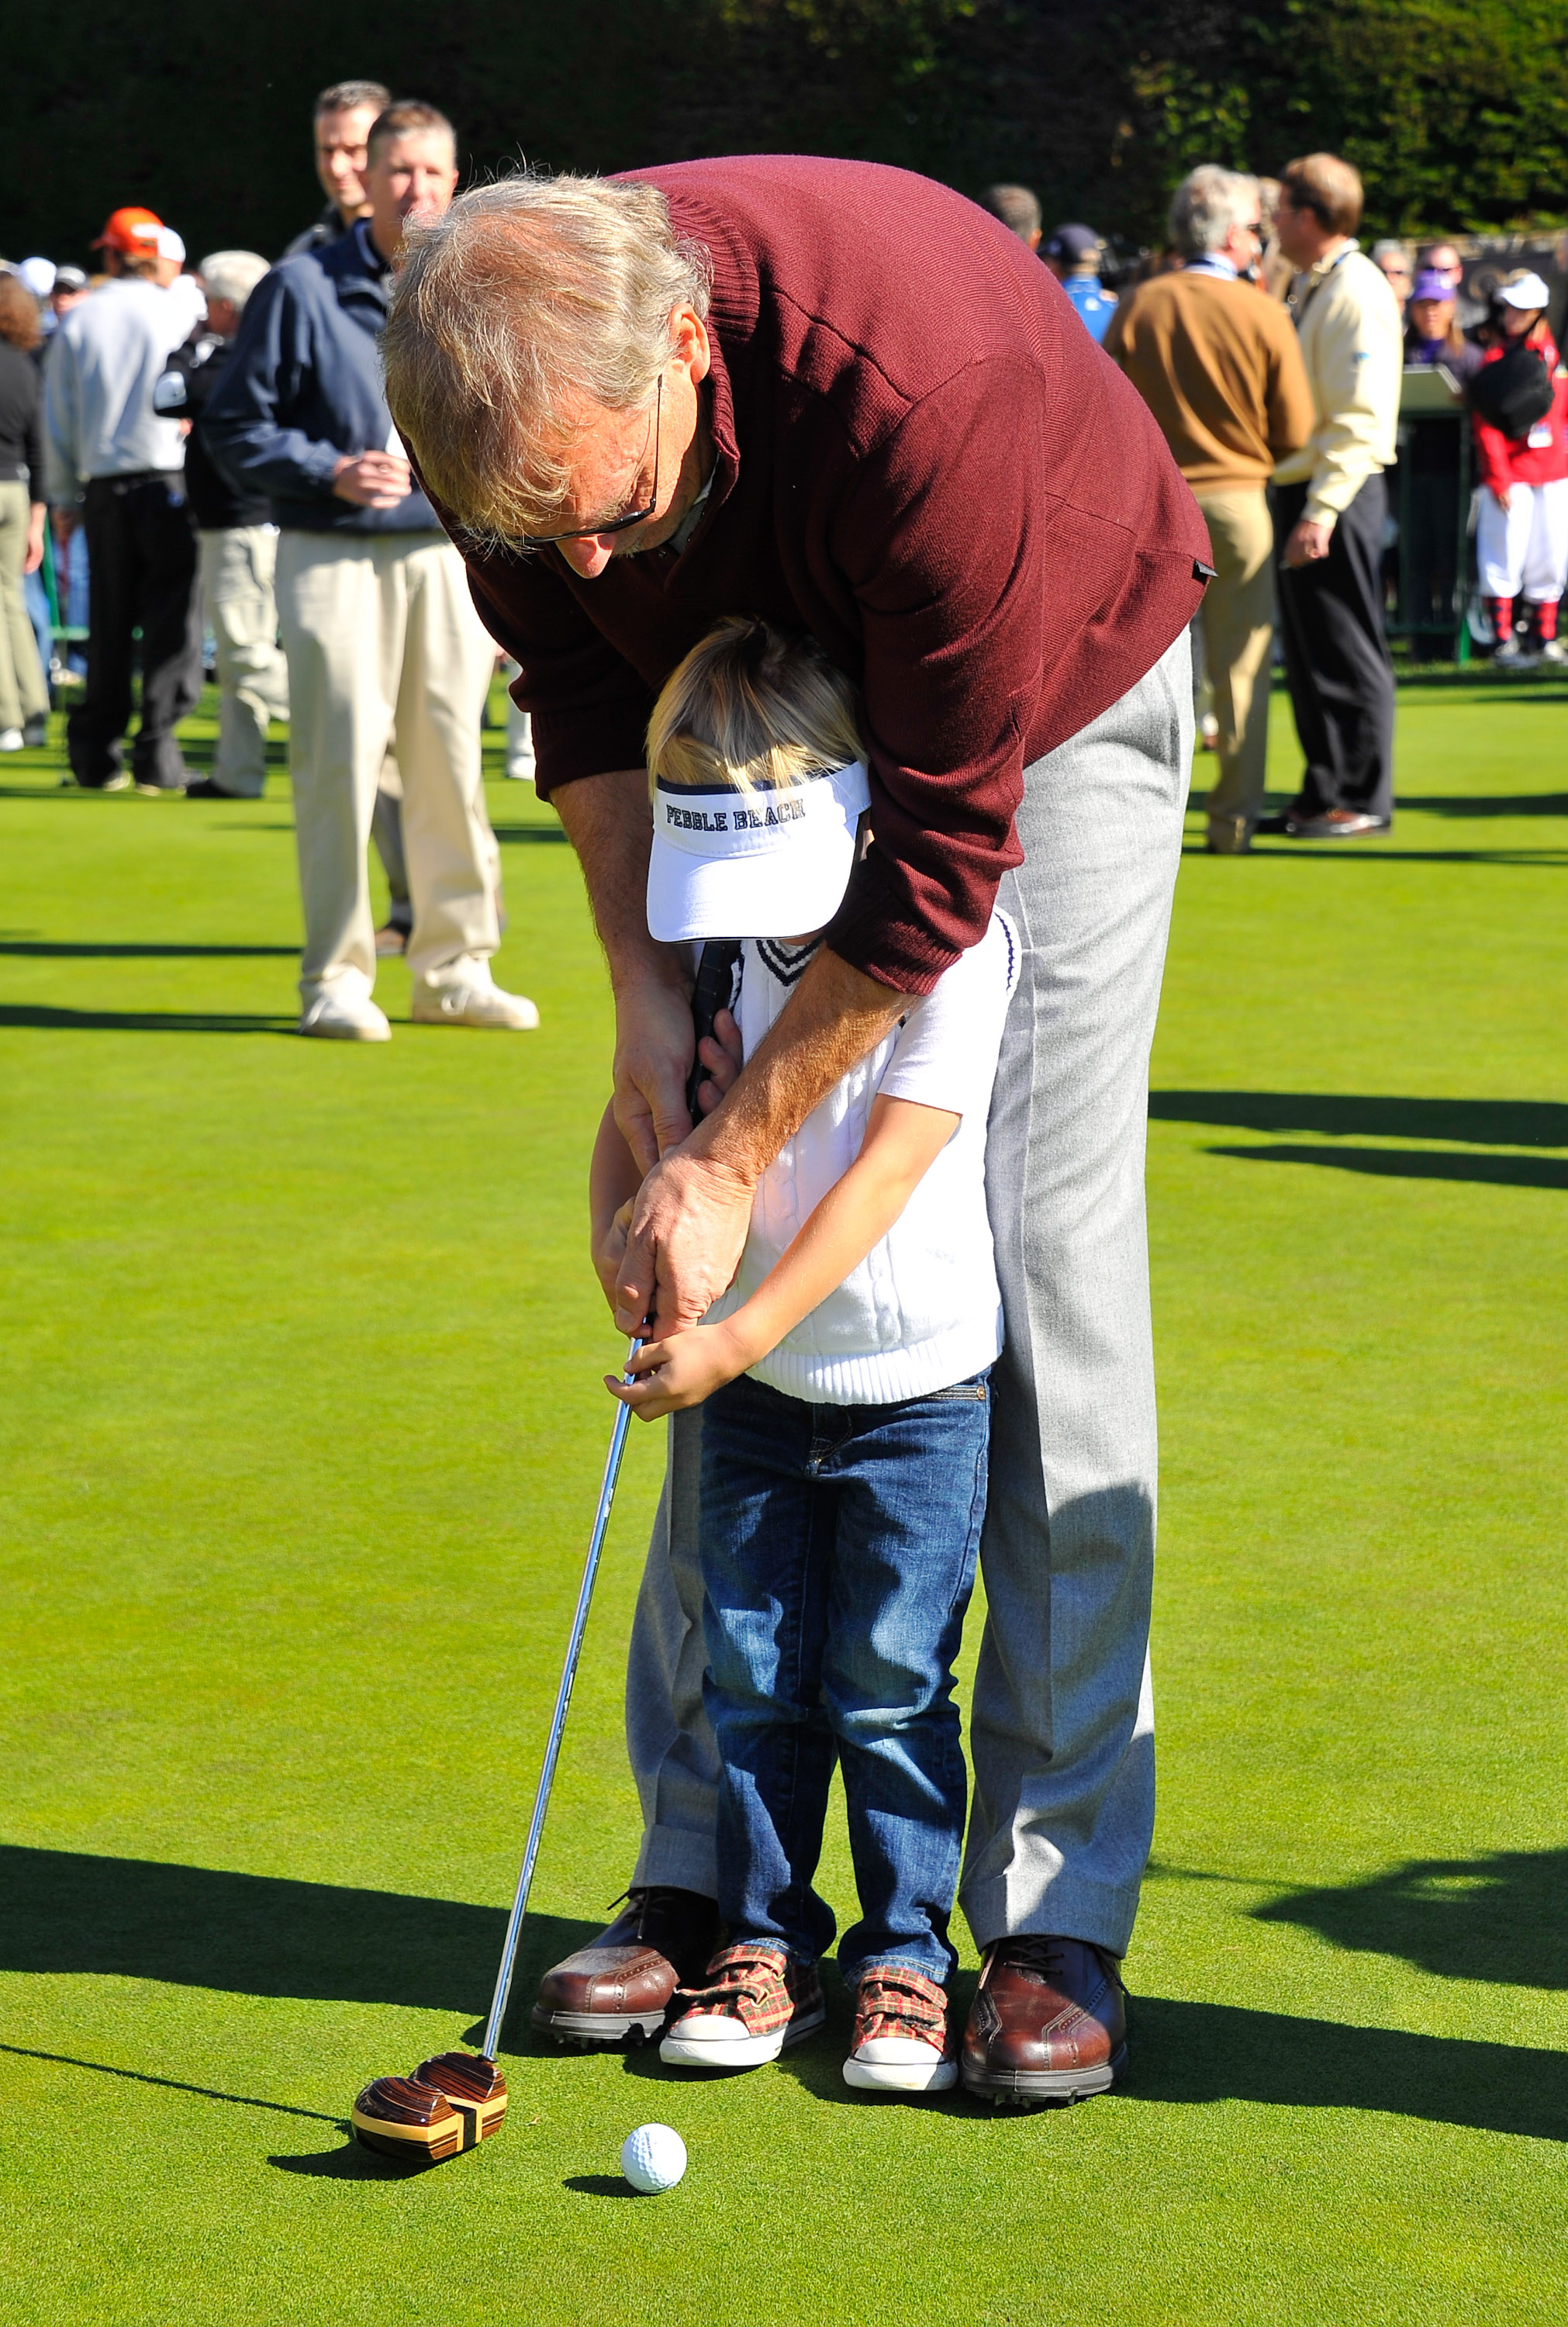 Kevin Costner plays golf with his son in the AT&T Pebble Beach National Pro-Am at Pebble Beach Golf Links on February 9, 2011, in Pebble Beach, California | Source: Getty Images